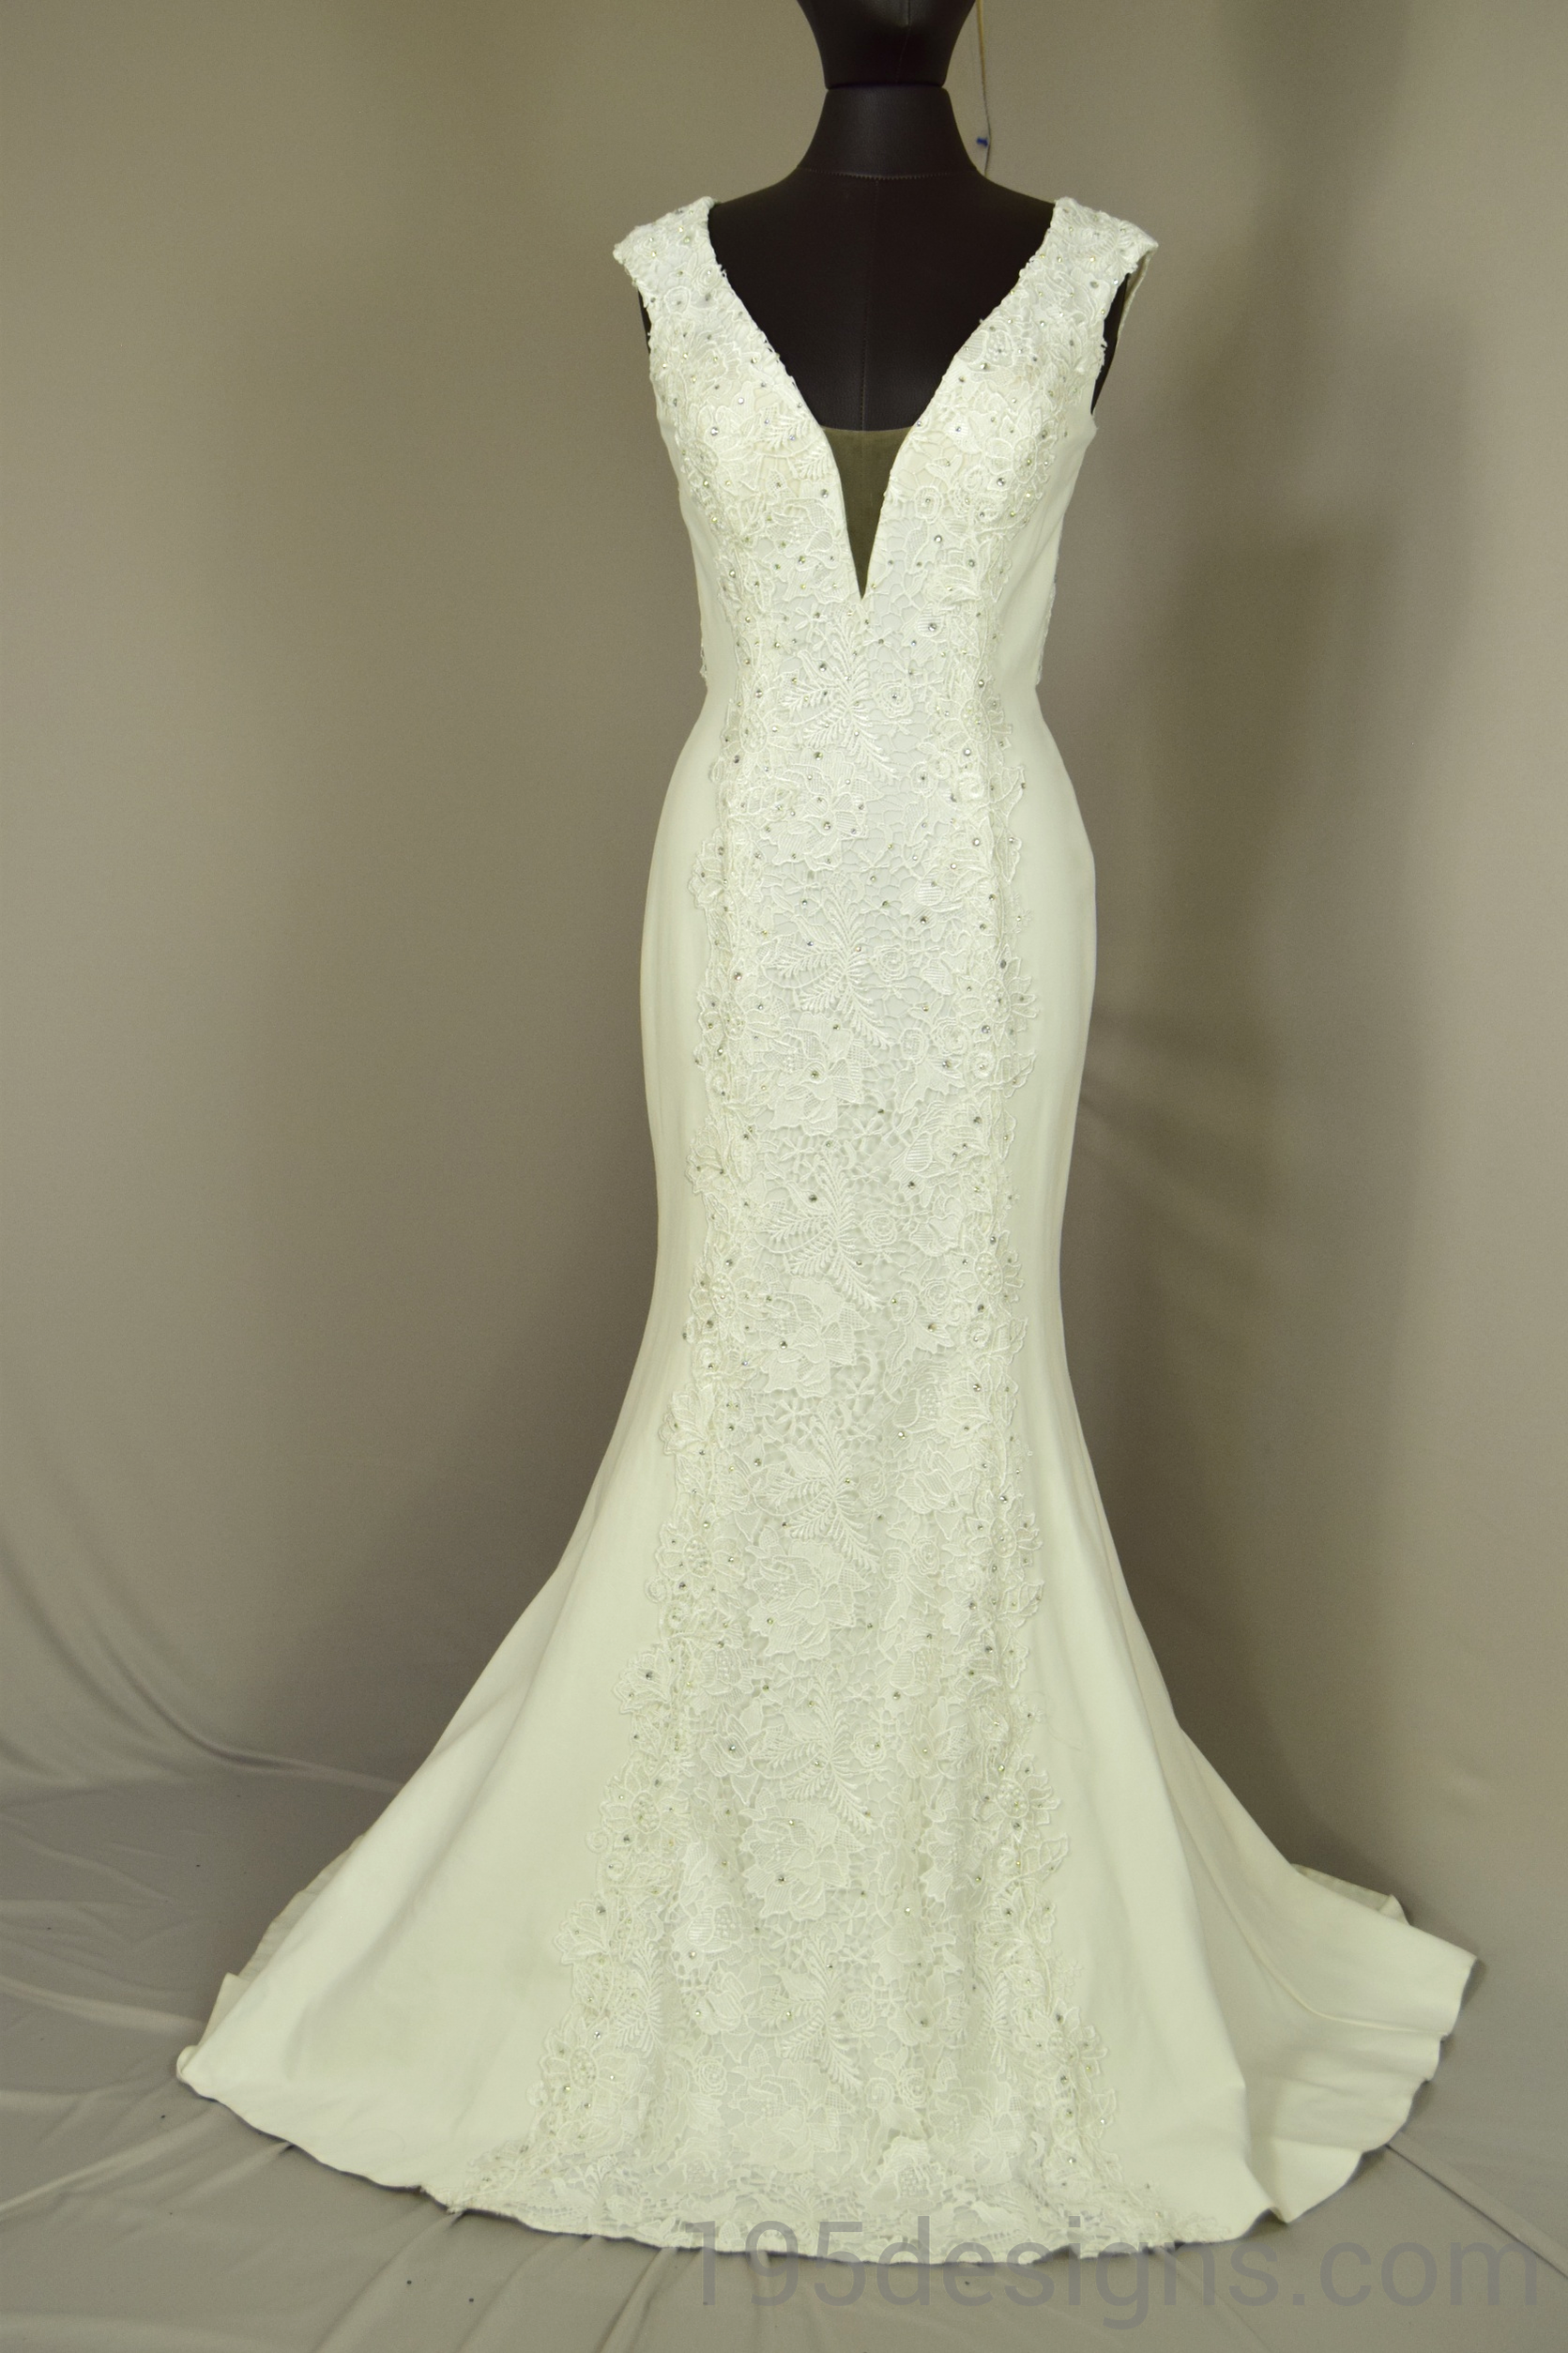 PANOPLY V-NECK LACE EVENING GOWN Wedding Dress